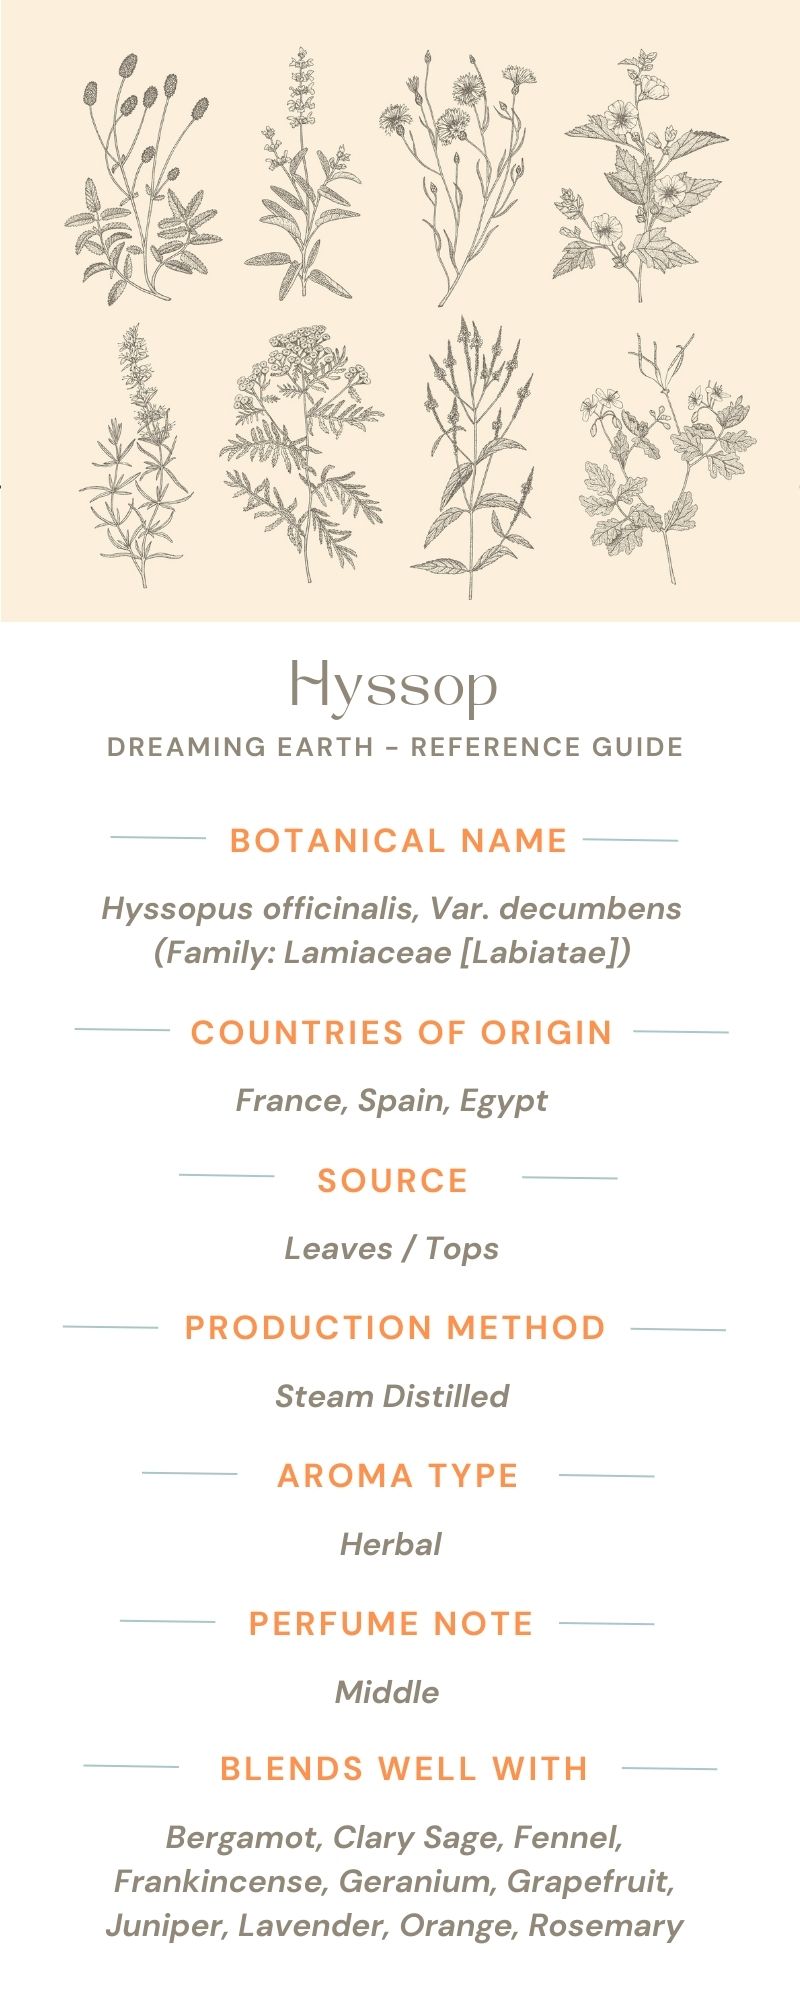 Load image into Gallery viewer, Hyssop Essential Oil - Dreaming Earth Inc
